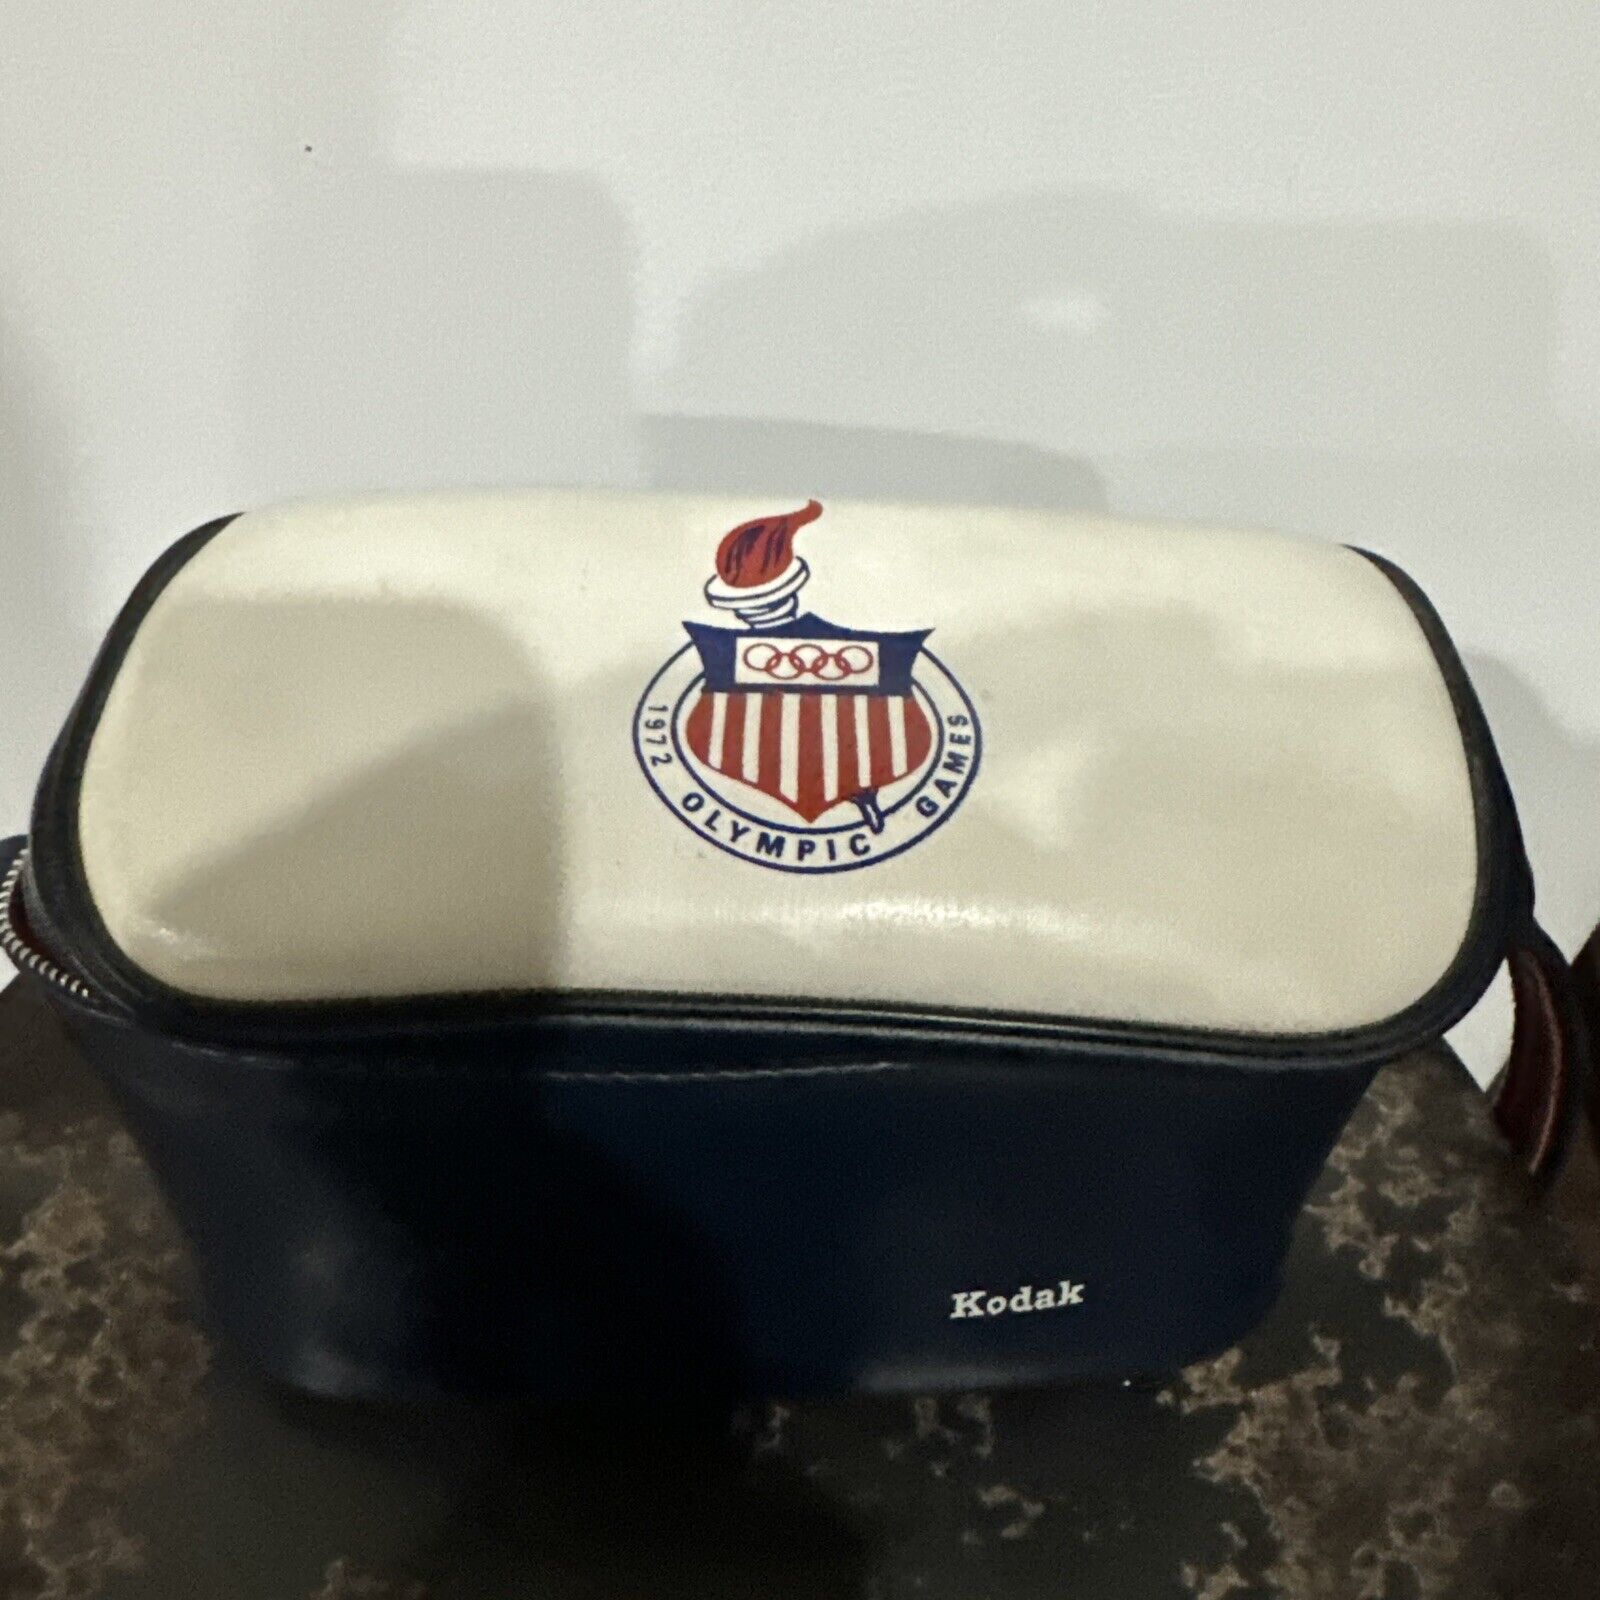 1972 Vintage Olympic Games Kodak Camera Carrying Bag Case Red White Blue Strap